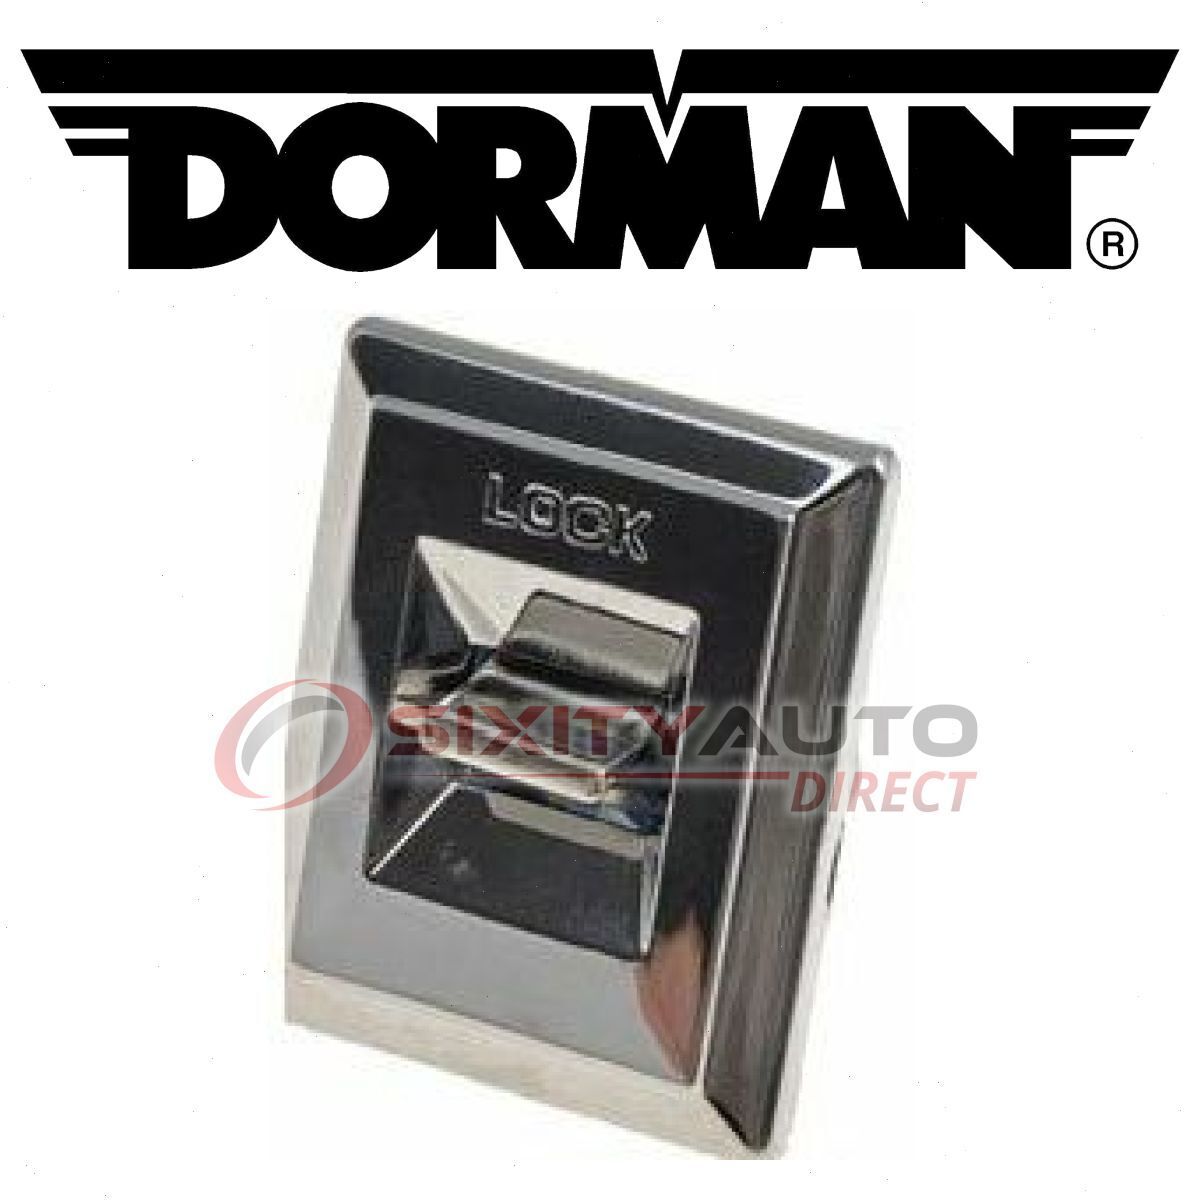 Dorman Front Right Door Lock Switch for 1978-1984 Oldsmobile Cutlass Calais hy